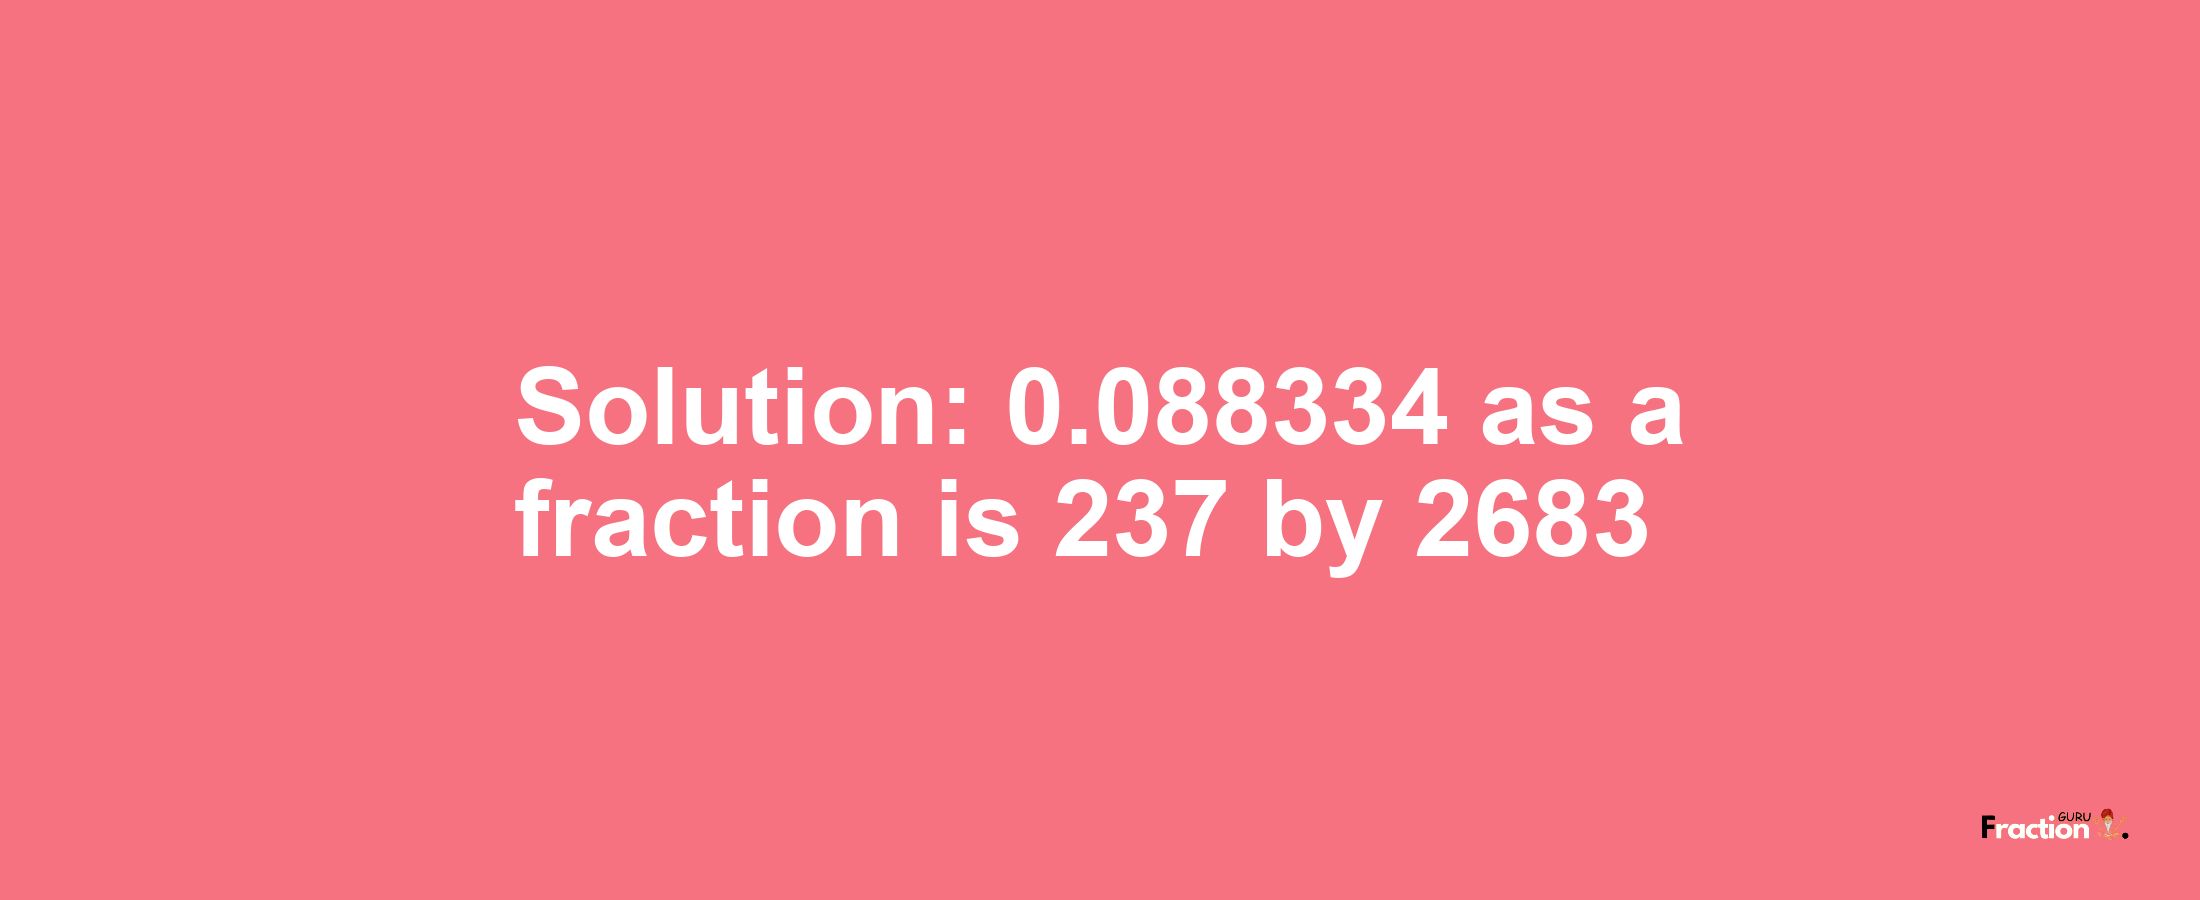 Solution:0.088334 as a fraction is 237/2683